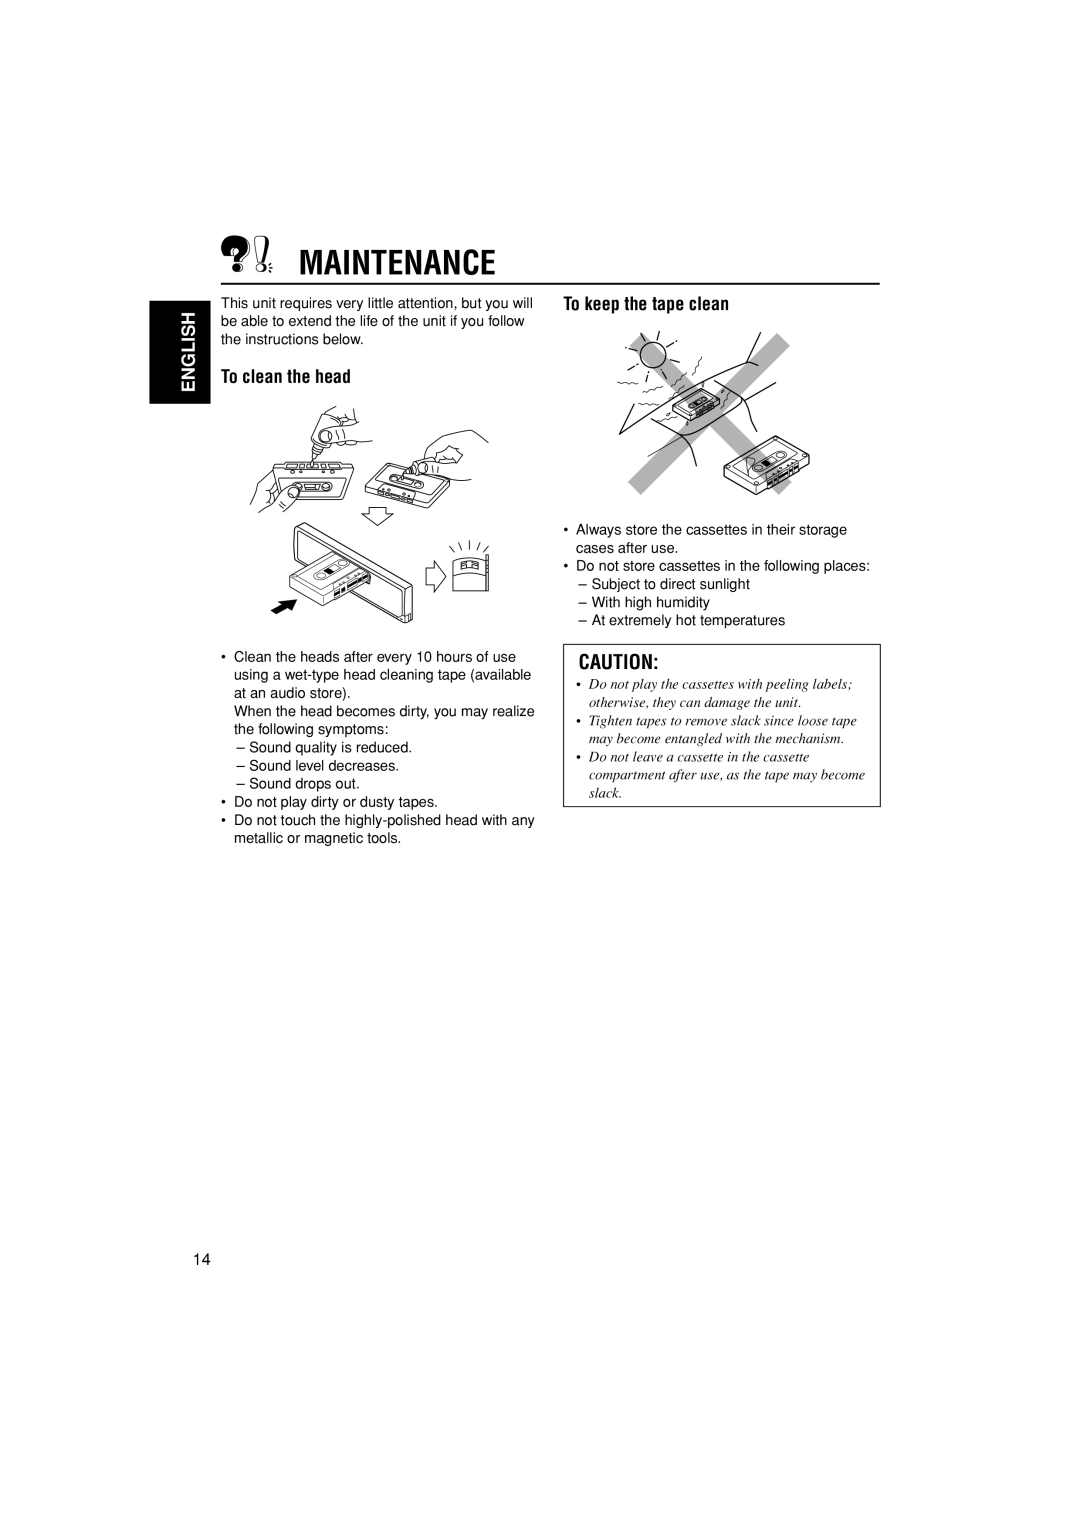 JVC KS-F185 manual Maintenance, English, To clean the head, To keep the tape clean 